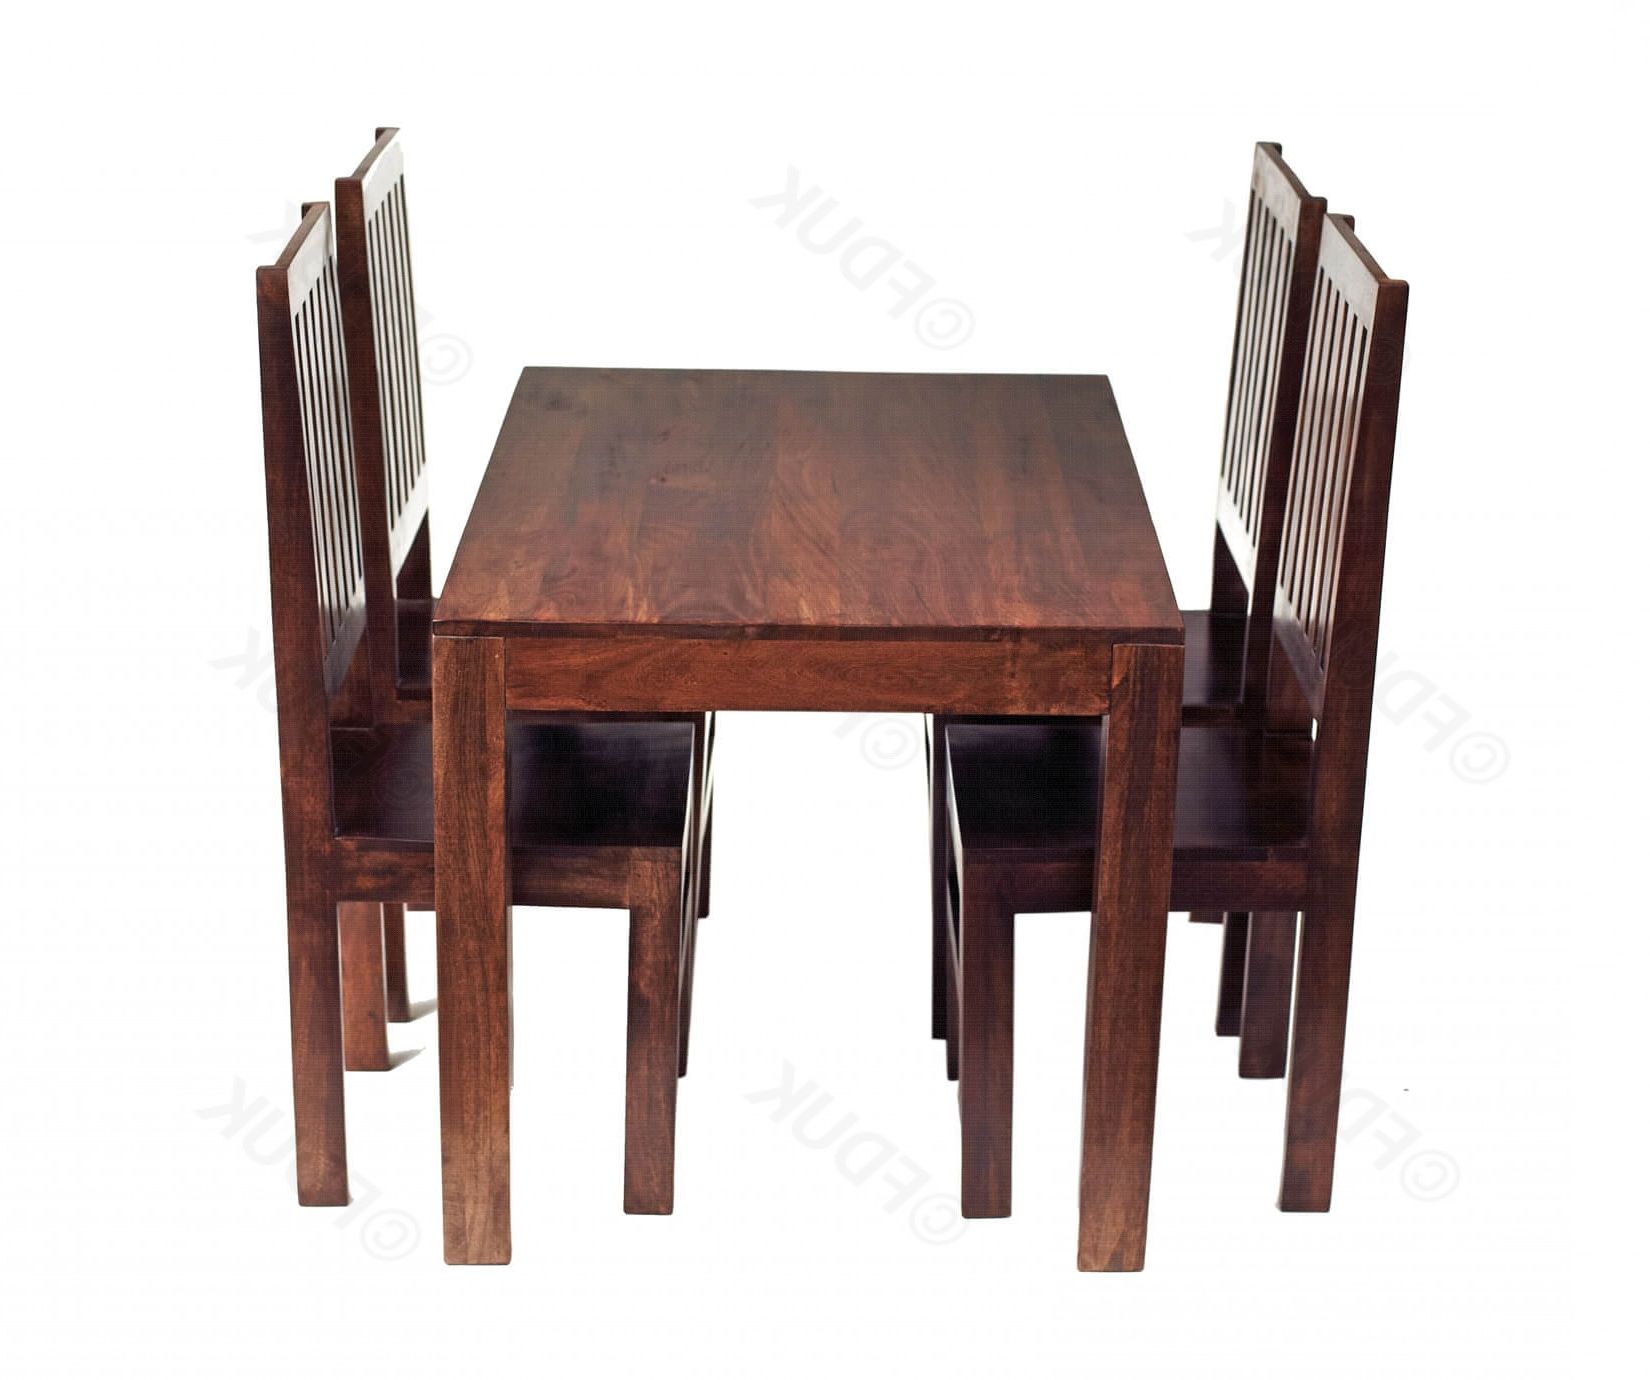 Toko Mango Small Dining Table With 4 Wooden With Most Popular Indian Wood Dining Tables (View 13 of 25)